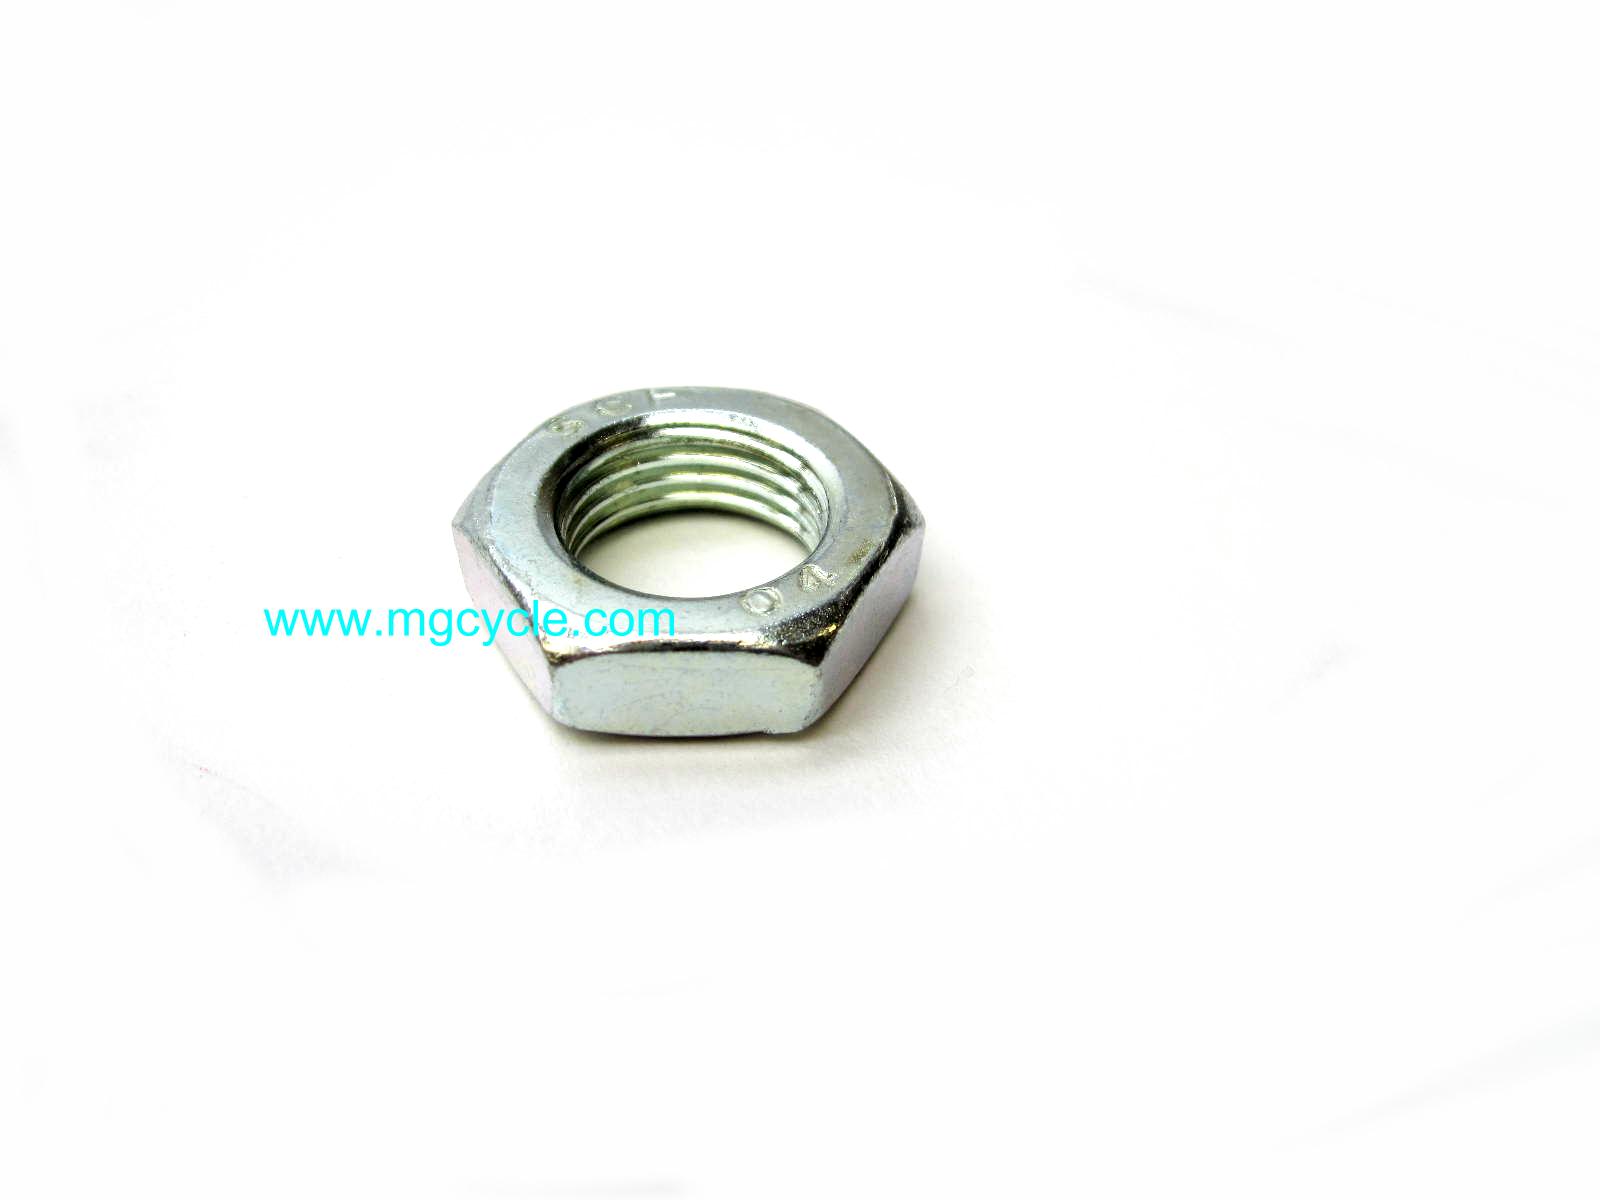 Axle nut, jam nut, M16 x 1.5, front axle many models - Click Image to Close